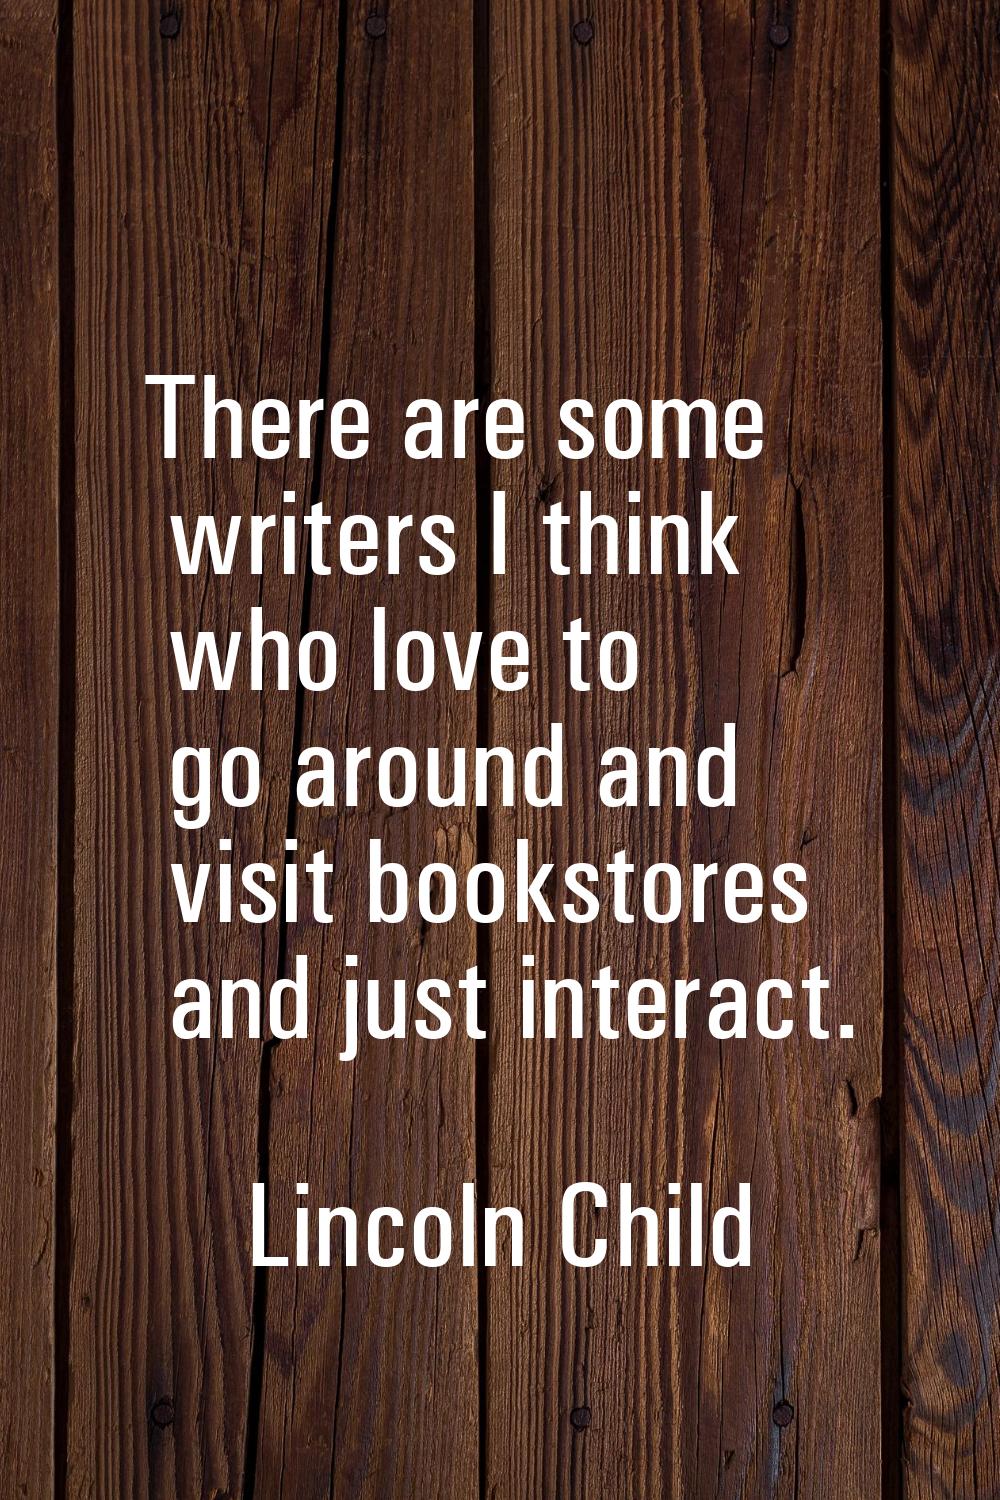 There are some writers I think who love to go around and visit bookstores and just interact.